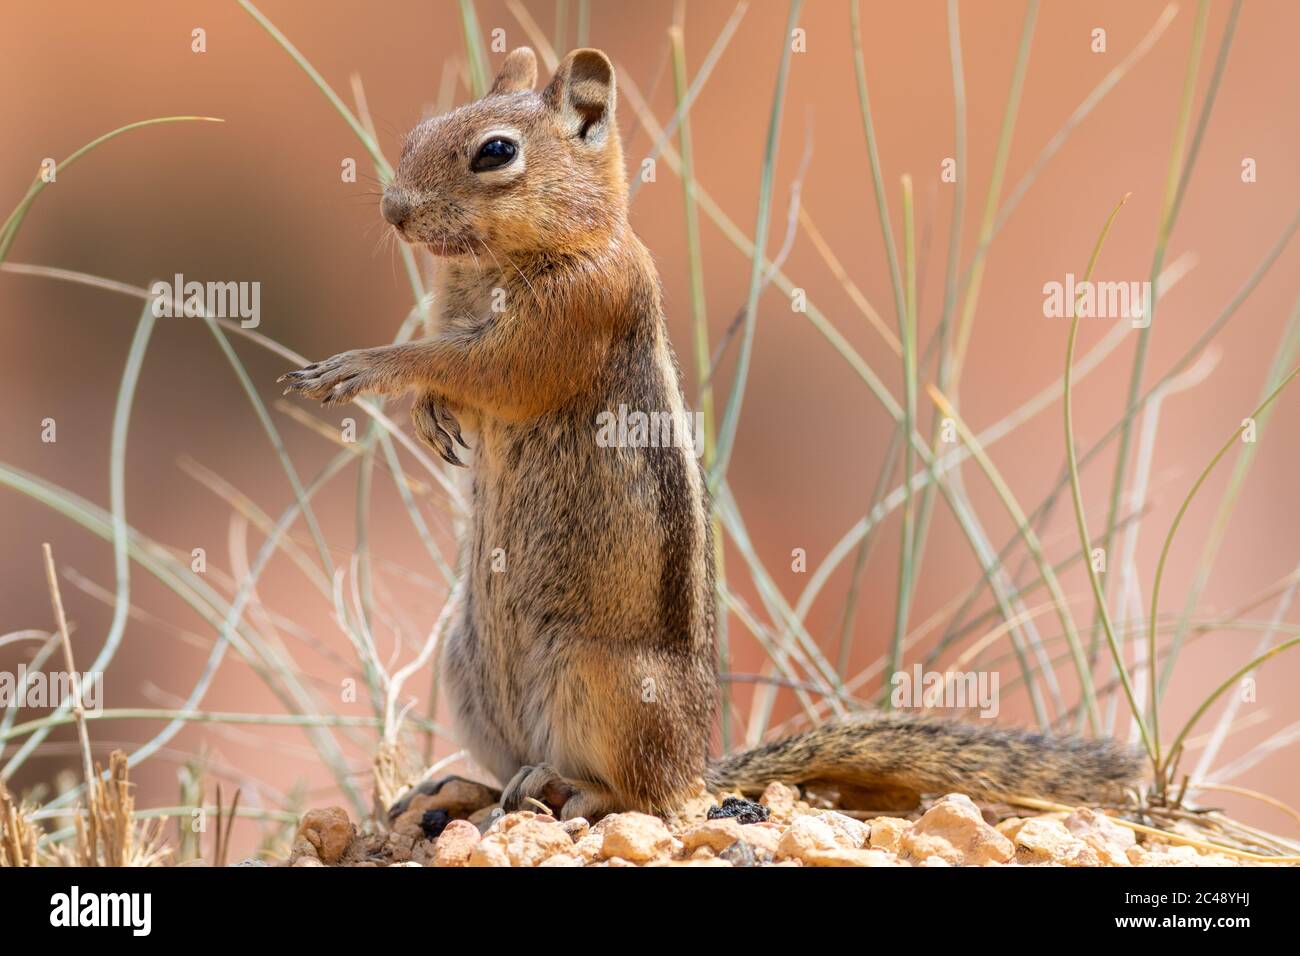 Golden-mantled Ground Squirrel (Callospermophilus lateralis). Bryce Canyon National Park, Utah, USA. Stock Photo